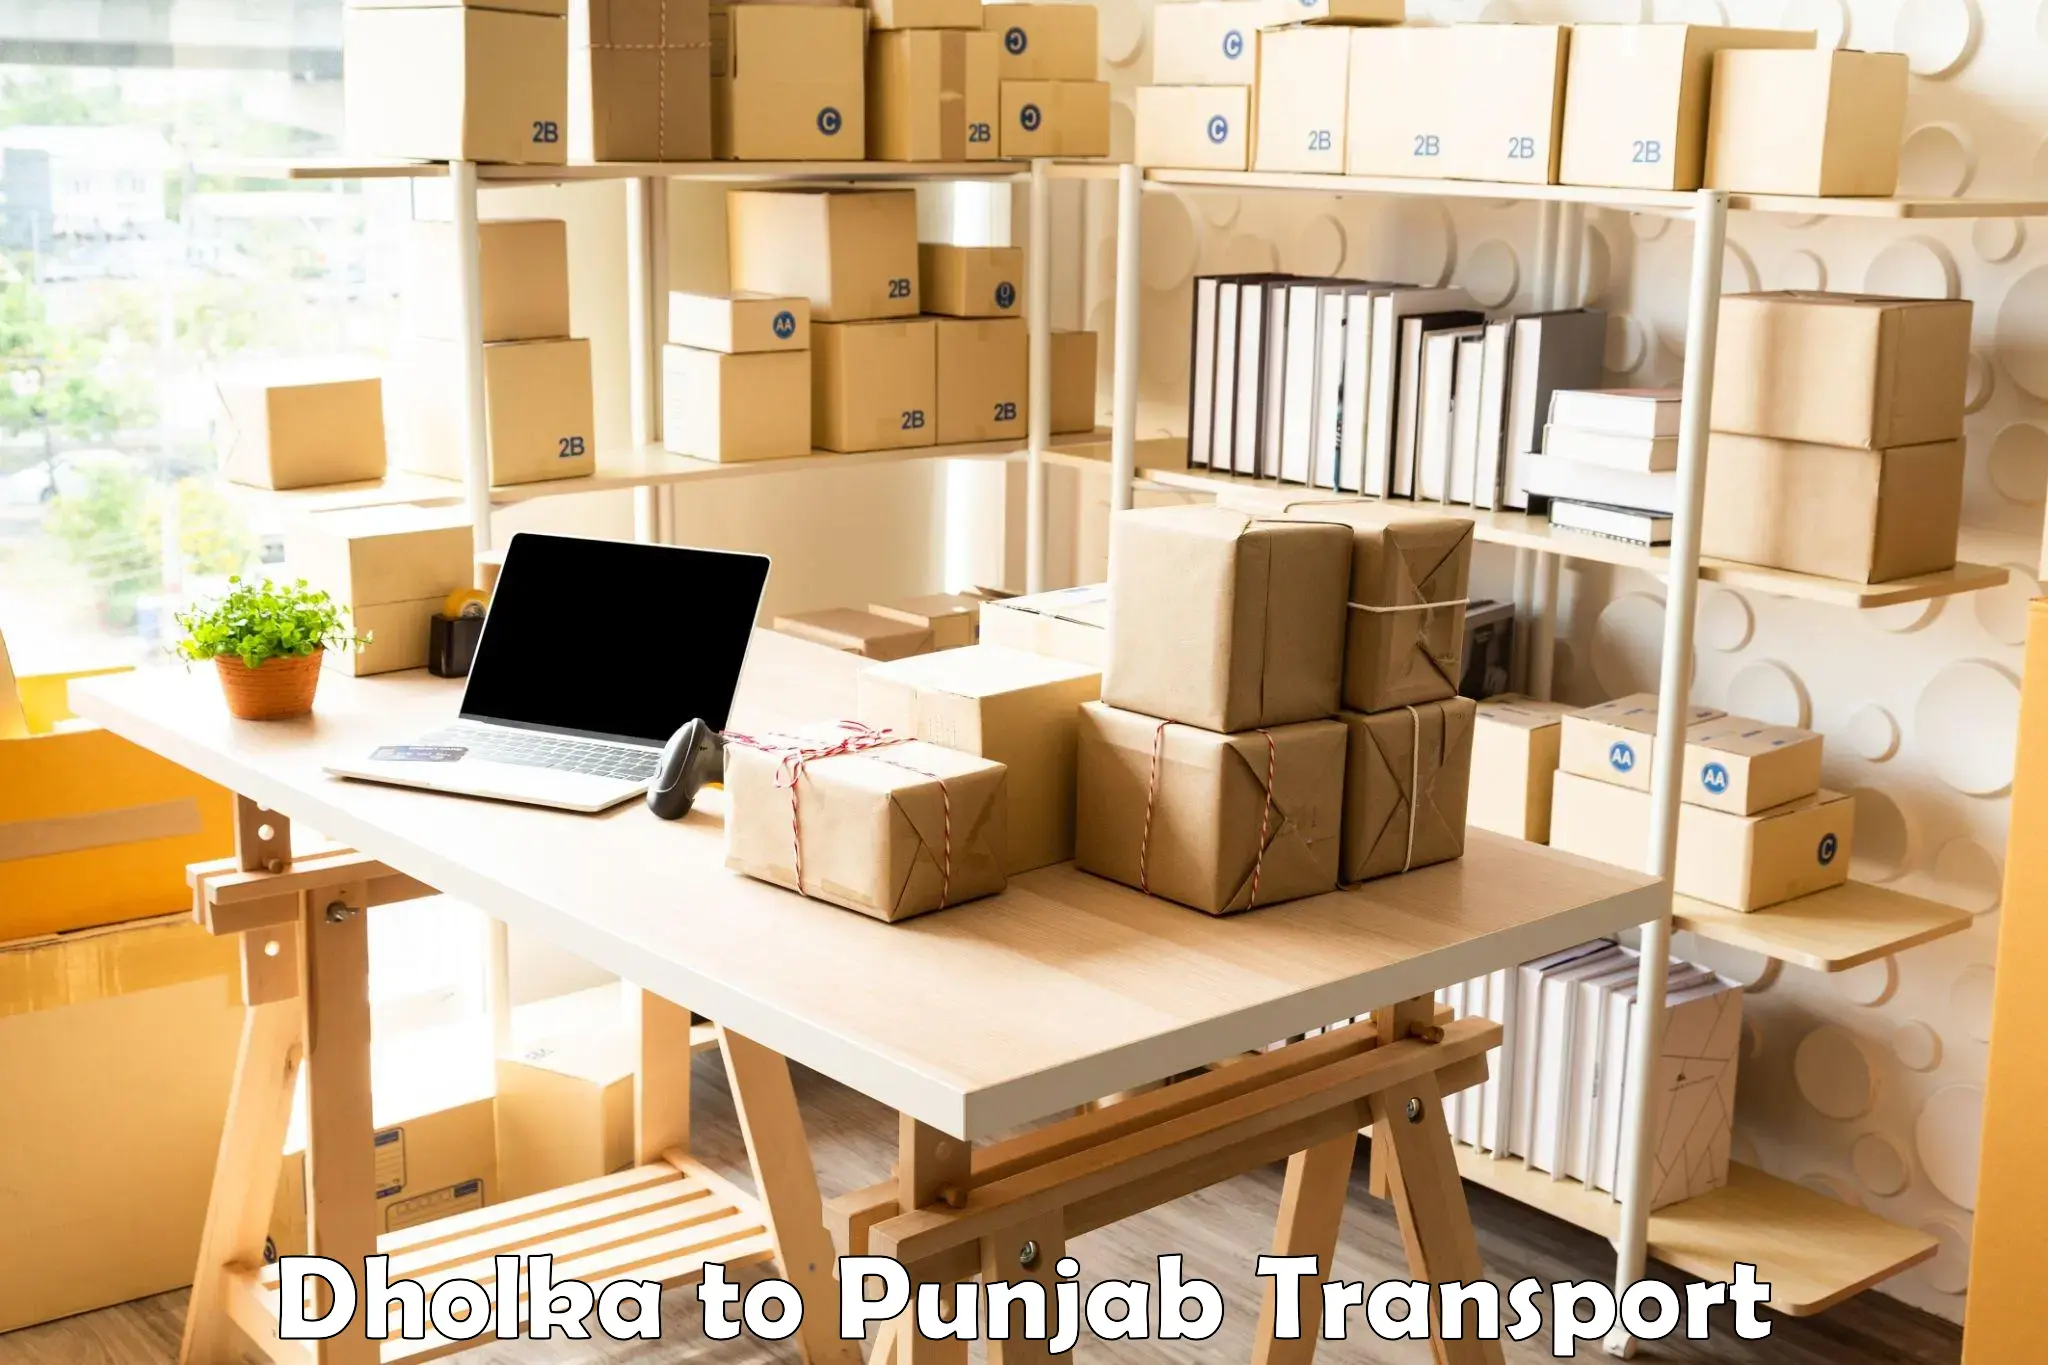 Air freight transport services Dholka to Sirhind Fatehgarh